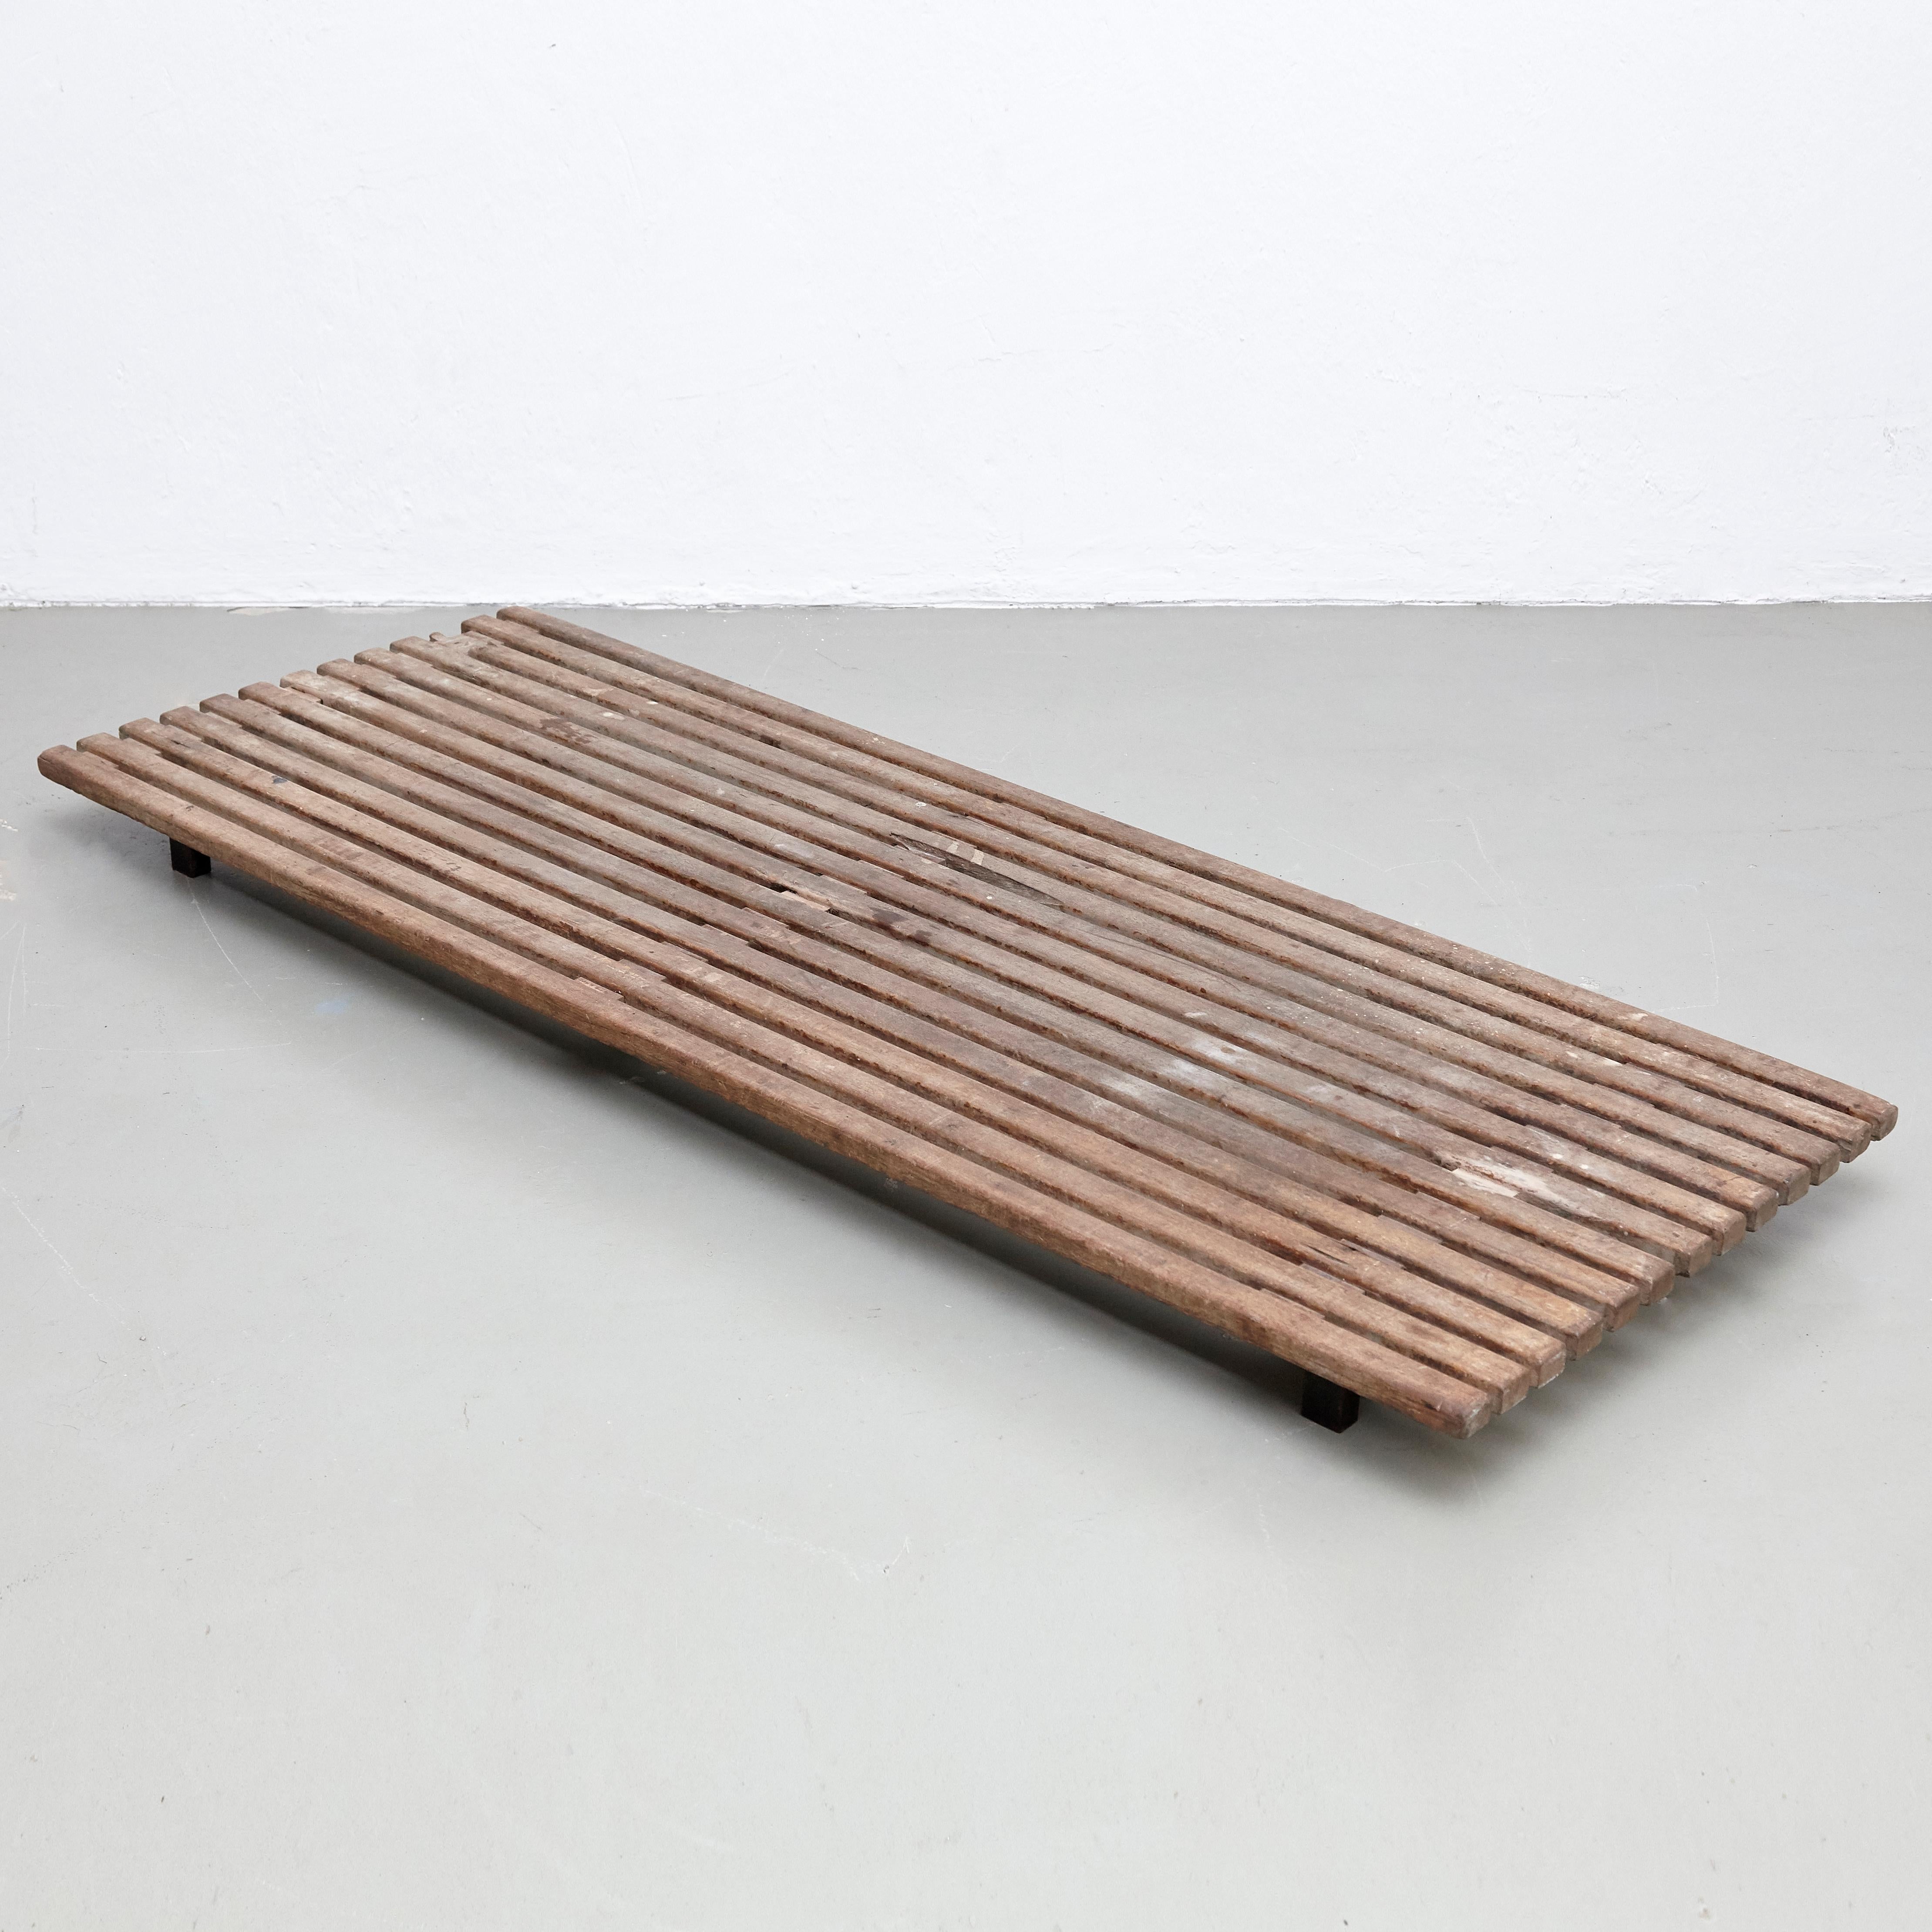 Bench designed by Charlotte Perriand, circa 1950.
Manufactured by Steph Simon (France), circa 1950.
Wood, lacquered metal frame and legs.

Provenance: Cansado, Mauritania (Africa).

In original condition, with wear consistent with age and use,